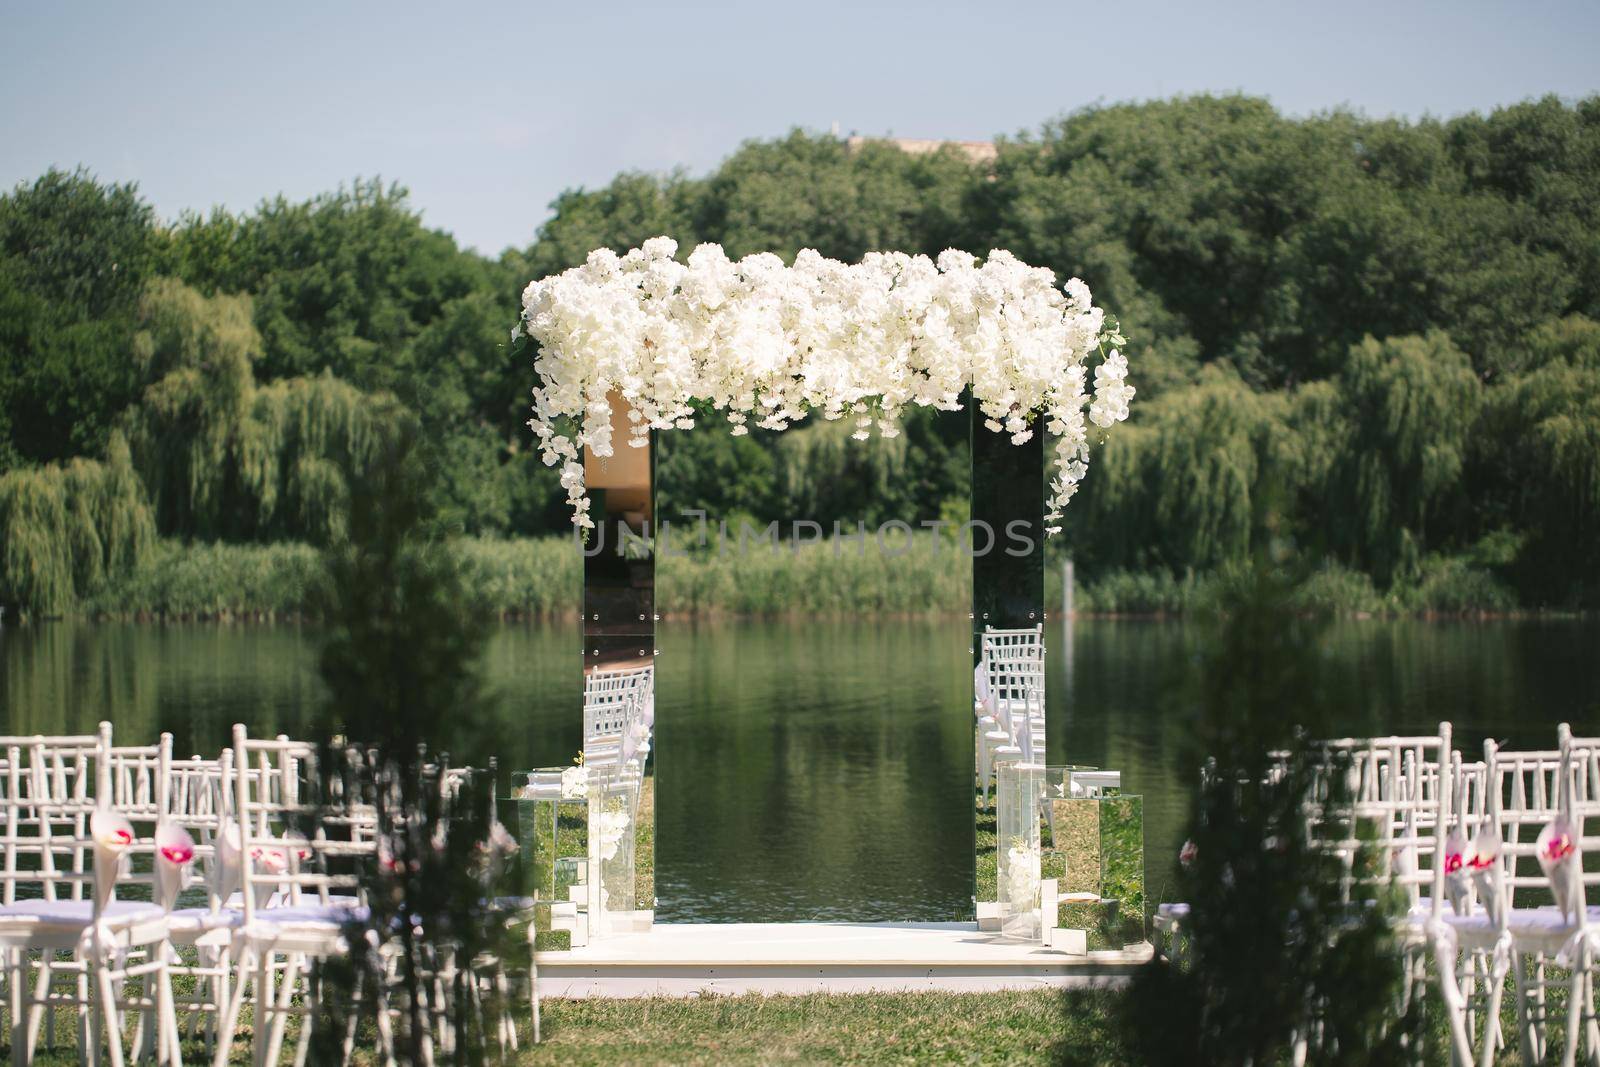 White mirrored wedding arch decorated with white flowers. The concept of an outdoor wedding ceremony venue by StudioPeace